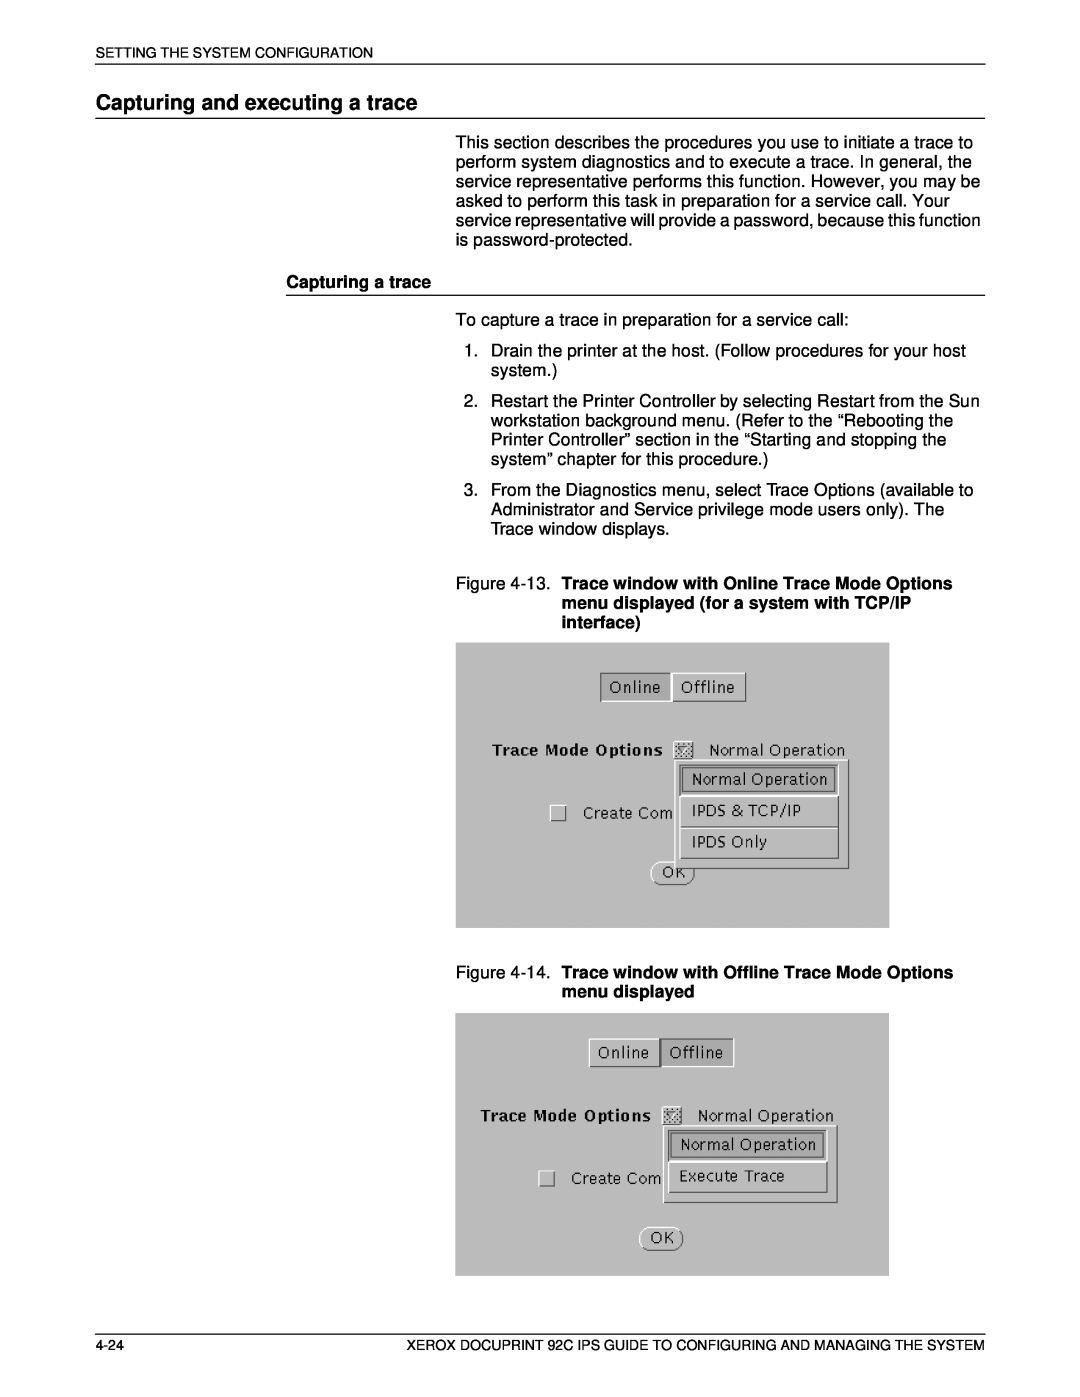 Xerox 92C IPS manual Capturing and executing a trace, Capturing a trace 